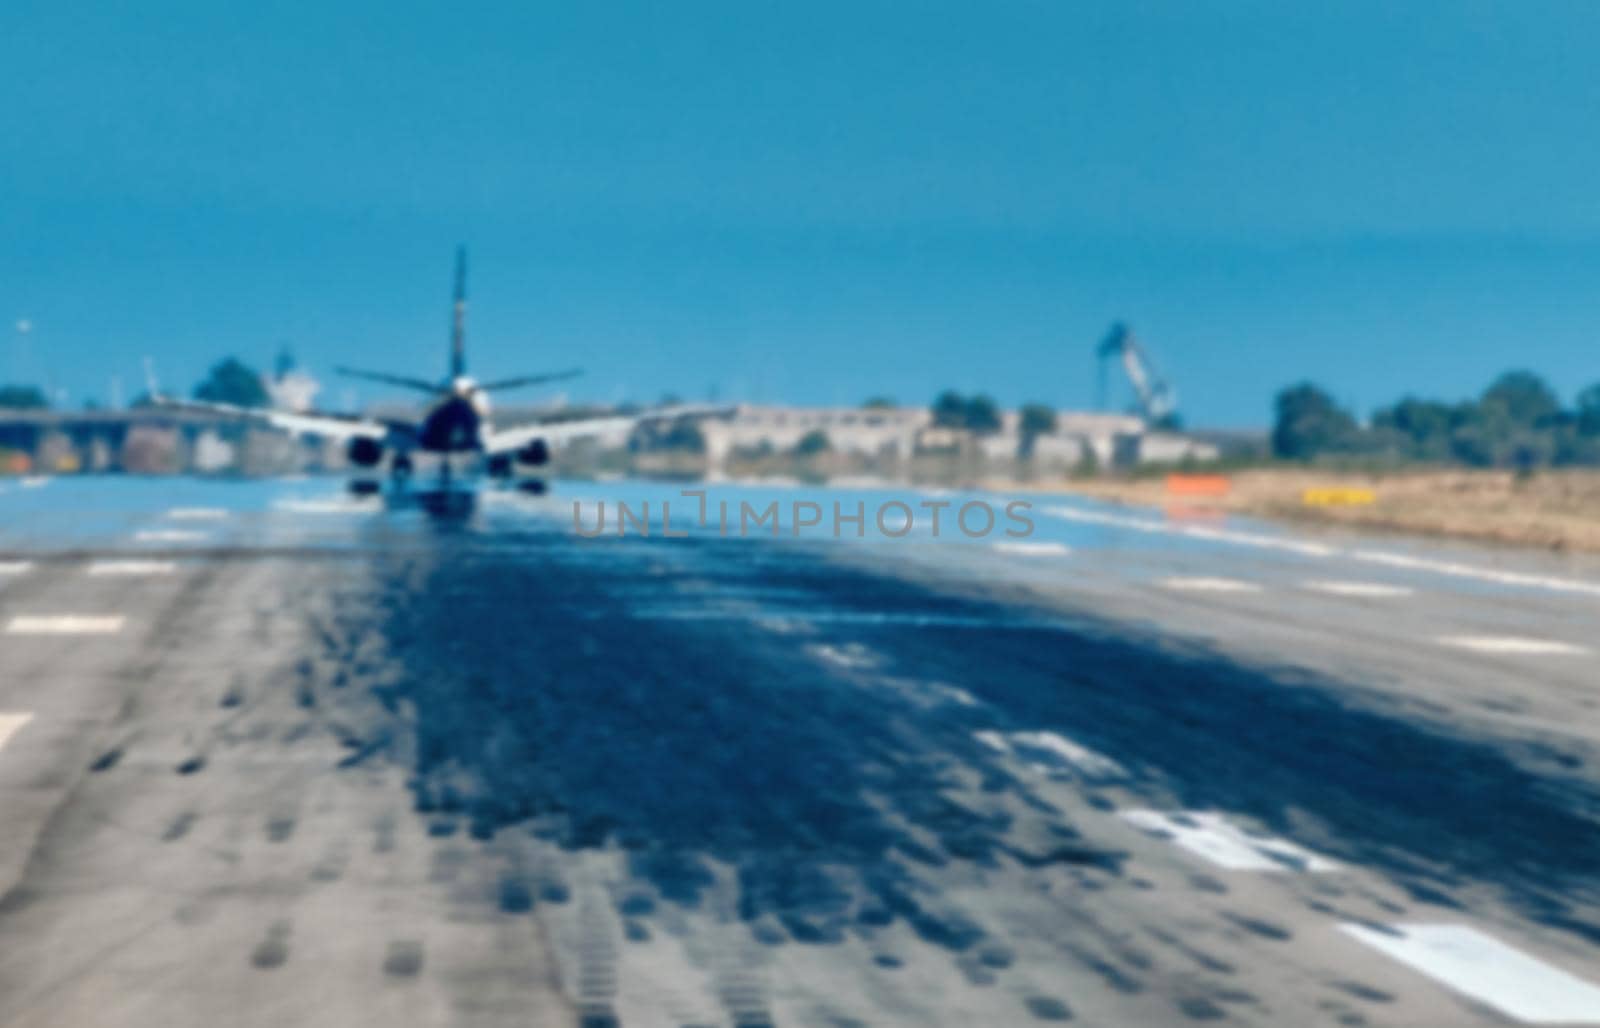 blurred image of airplane taking off from airport line - copy space